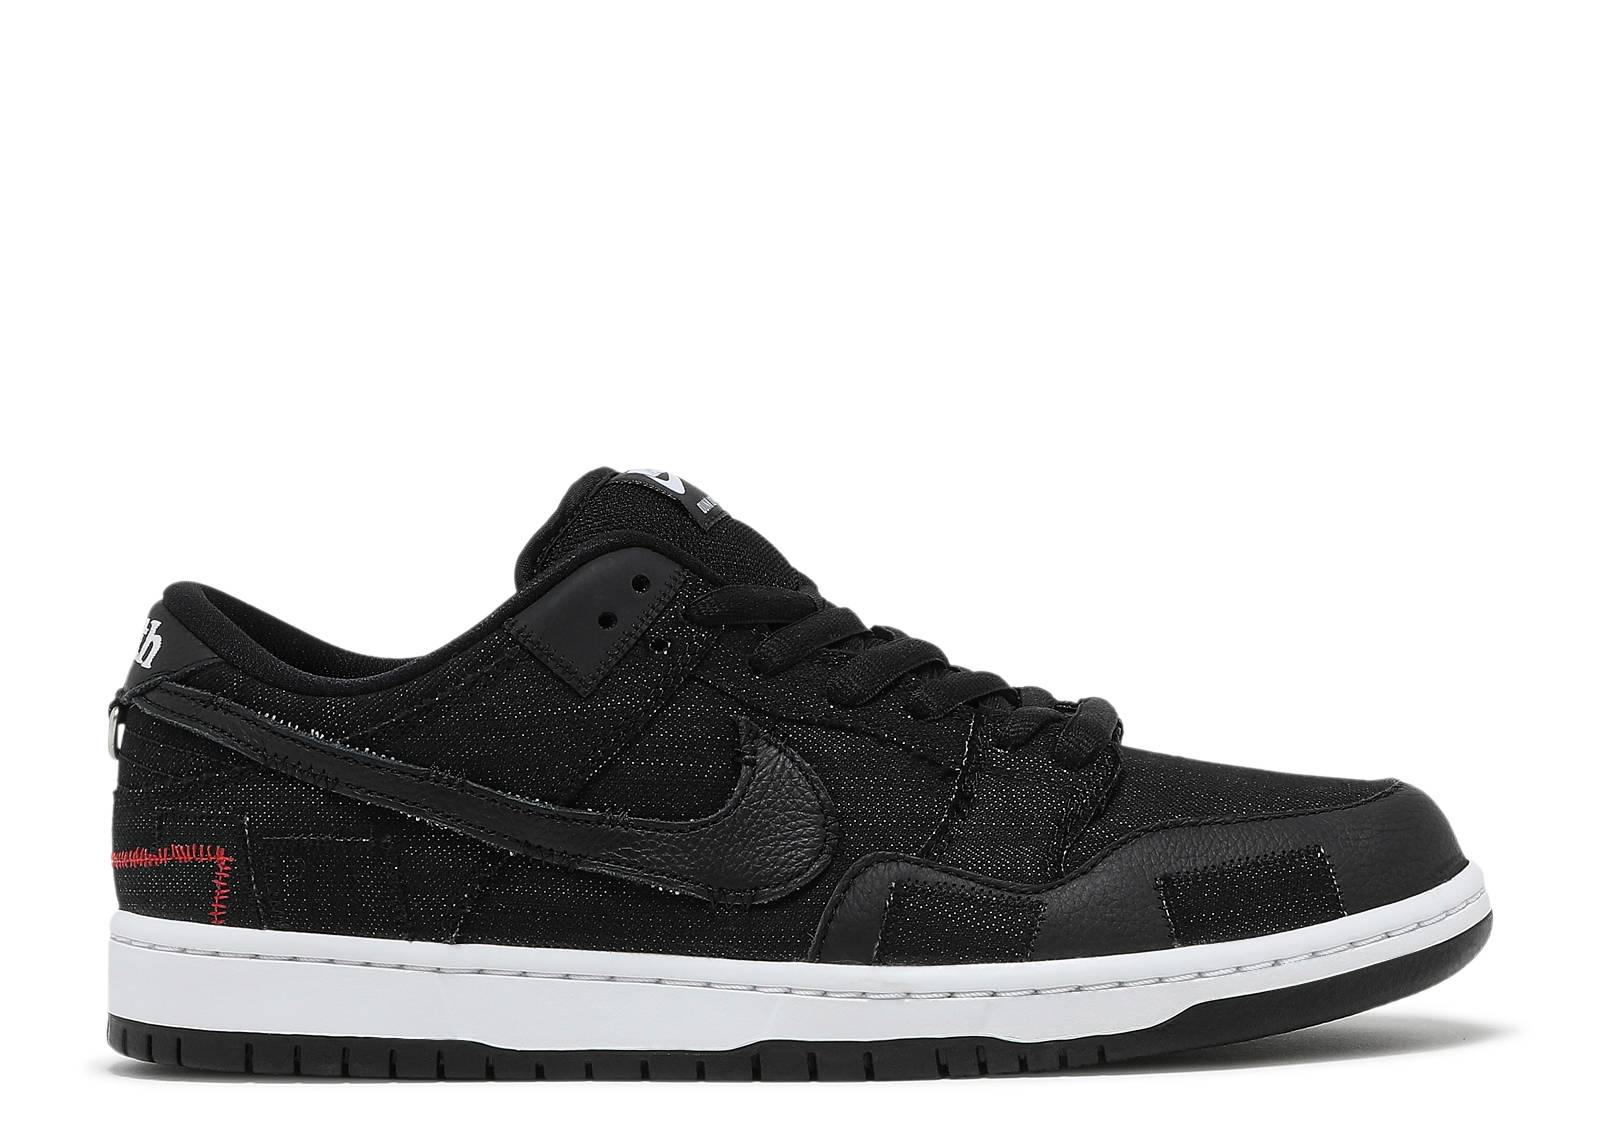 Wasted Youth x Dunk Low SB 'Black Denim' Special Box